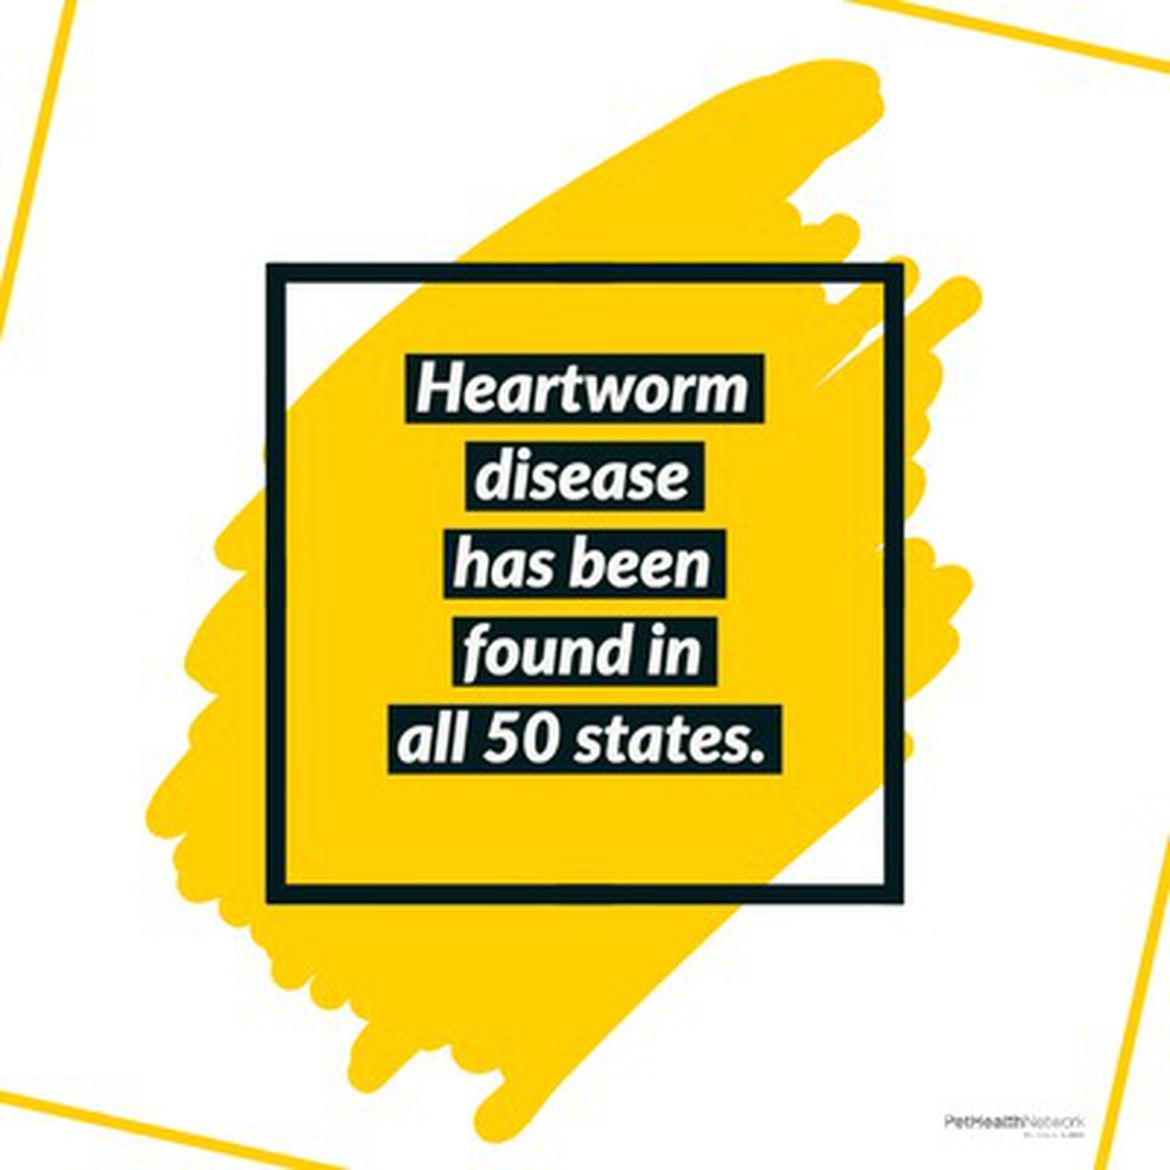 Social media post about how heartworm disease has been found in all 50 states.